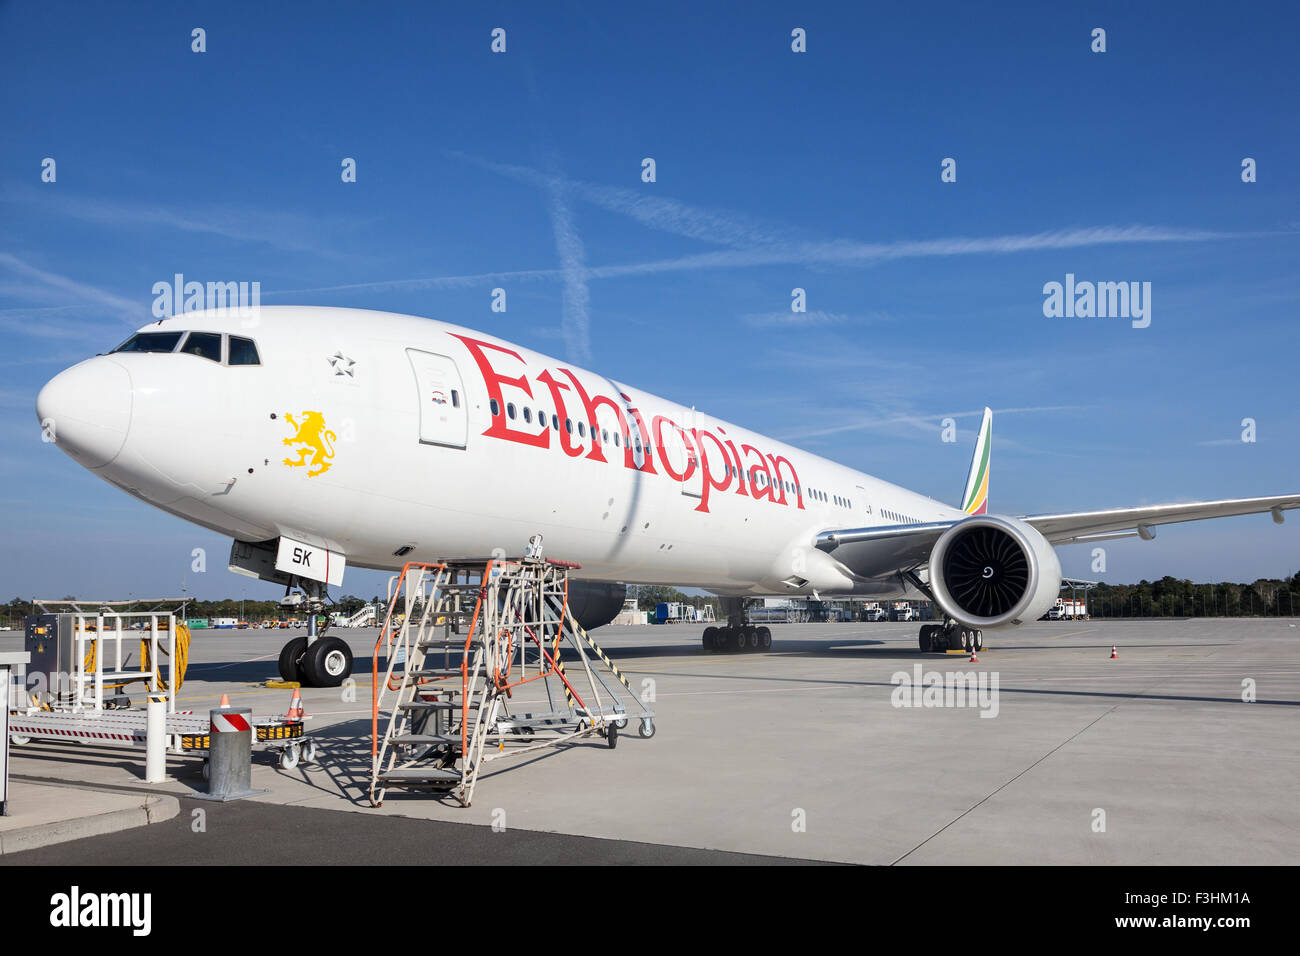 Ethiopian Airlines Aircraft at the Frankfurt International Airport Stock Photo